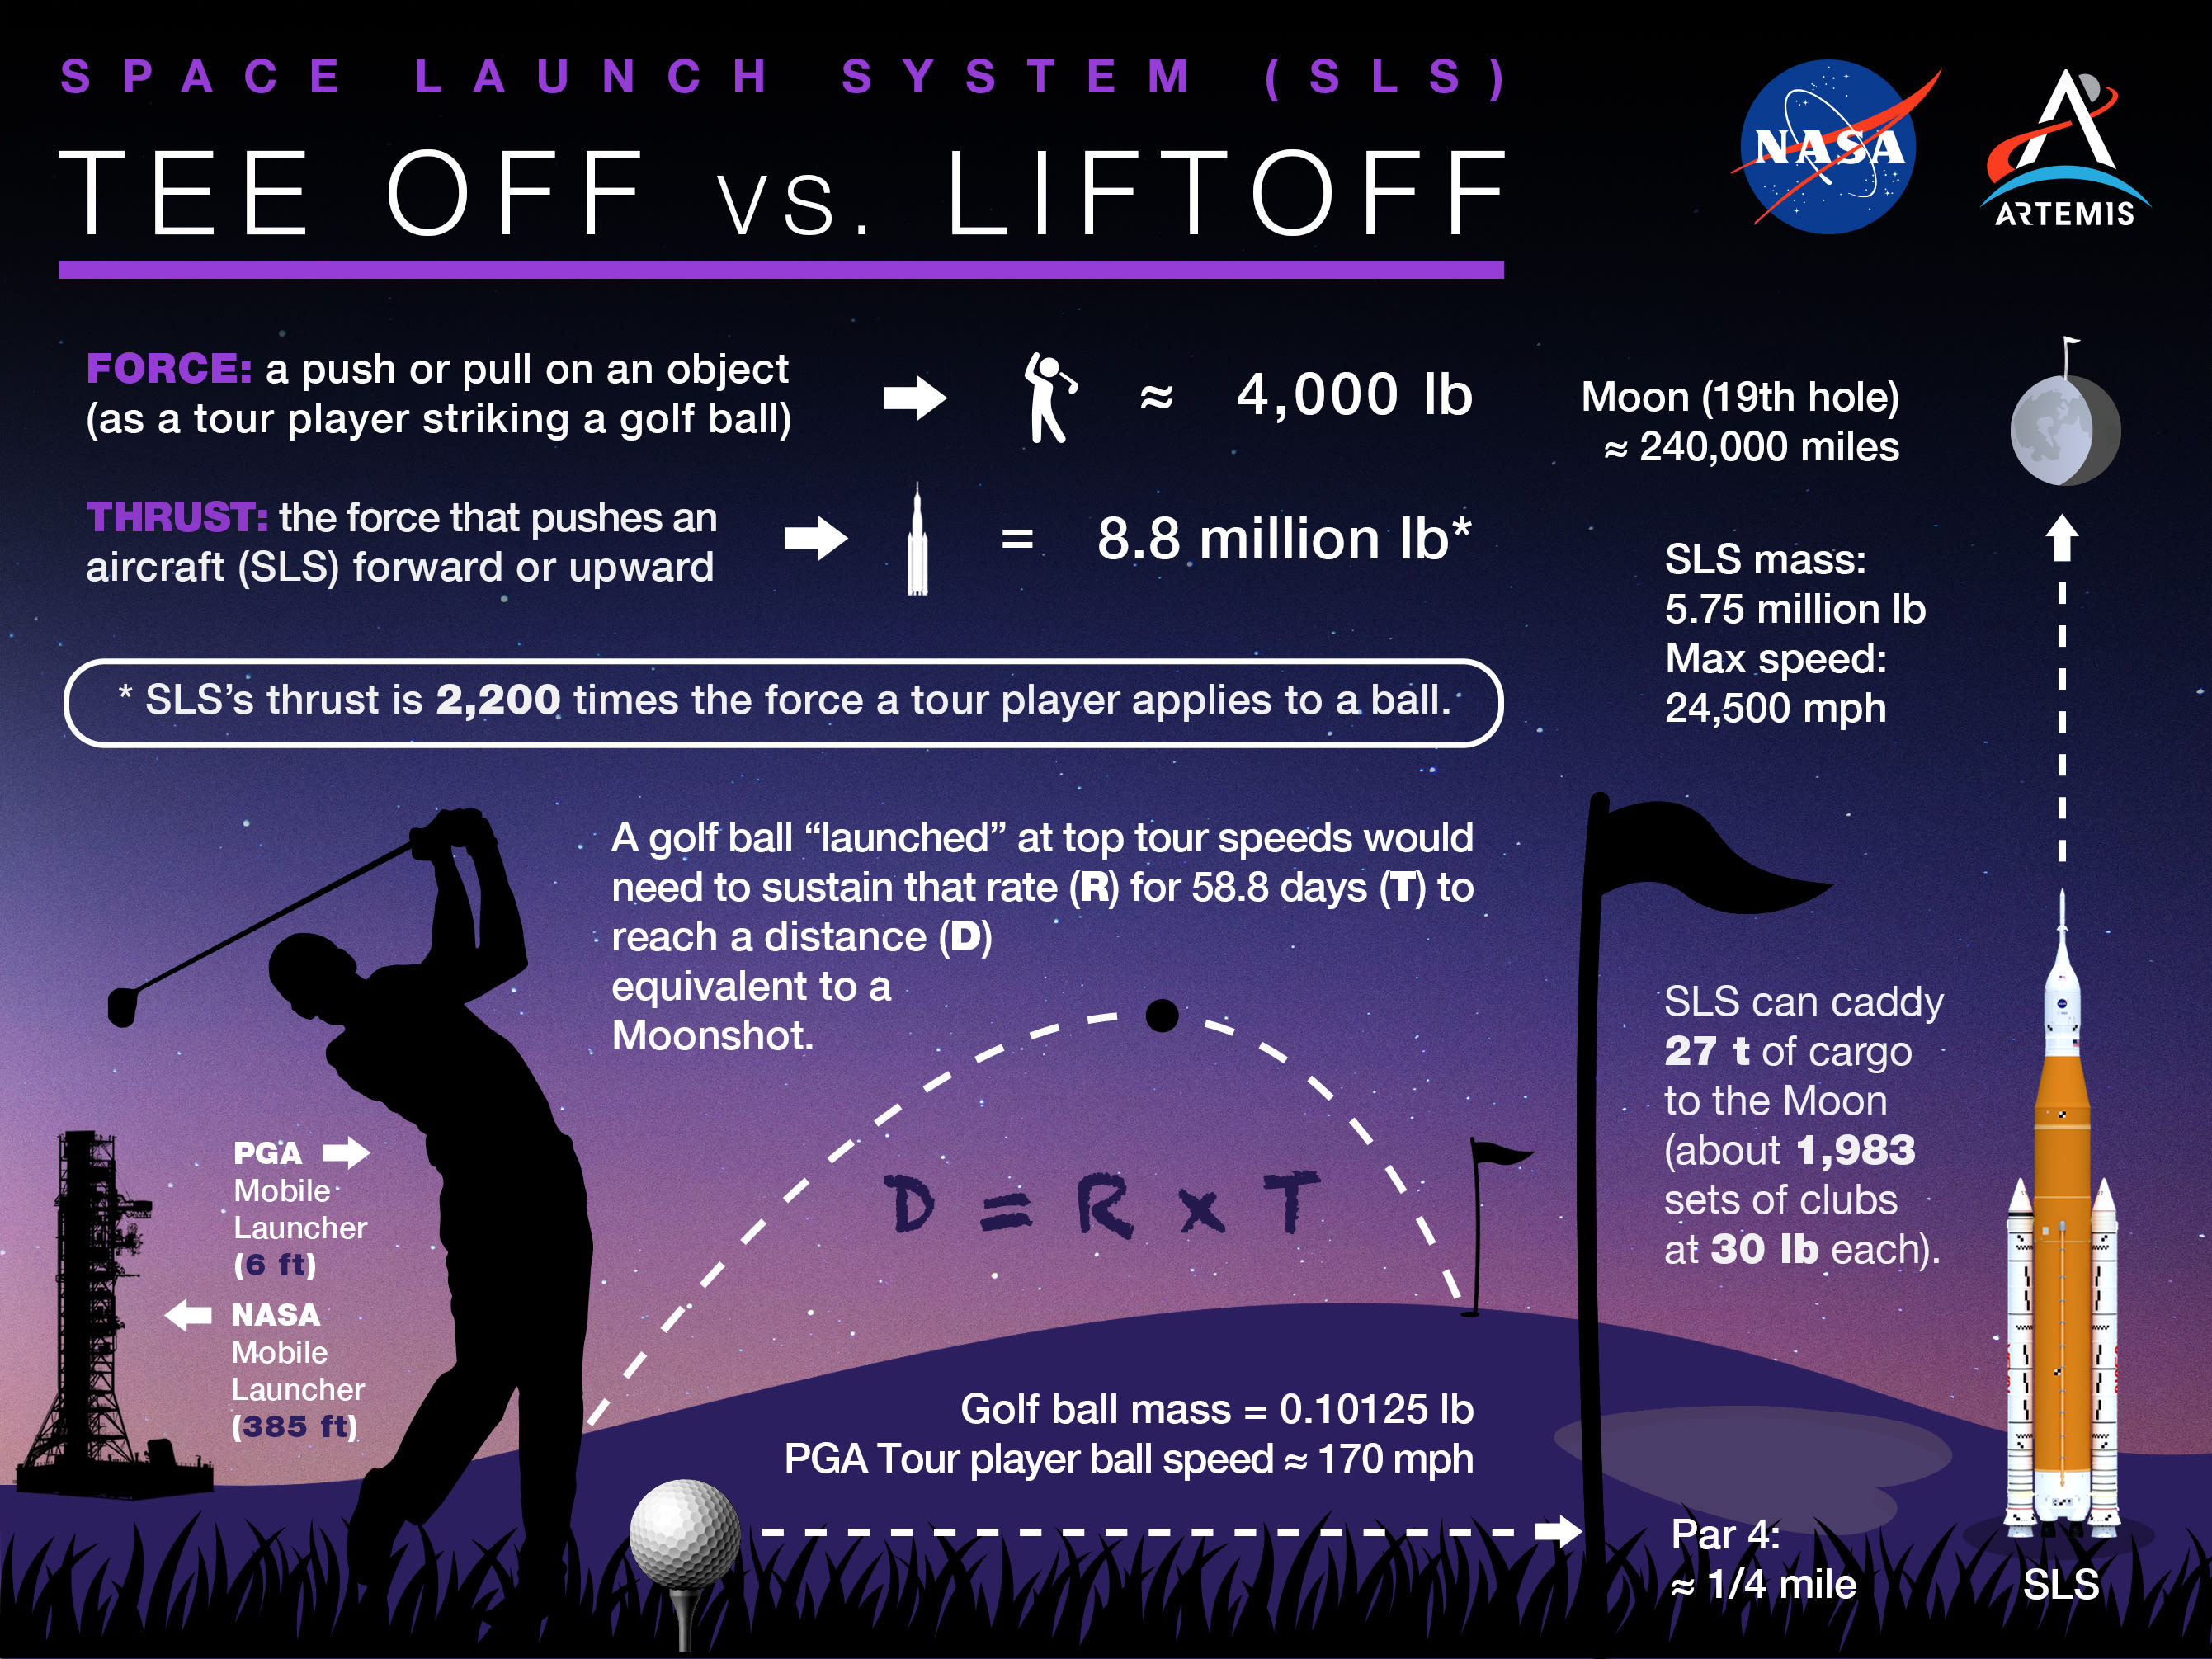 There are similarities between launching a golf ball into the air and sending NASA’s Space Launch System (SLS) rocket on its debut Artemis I mission.